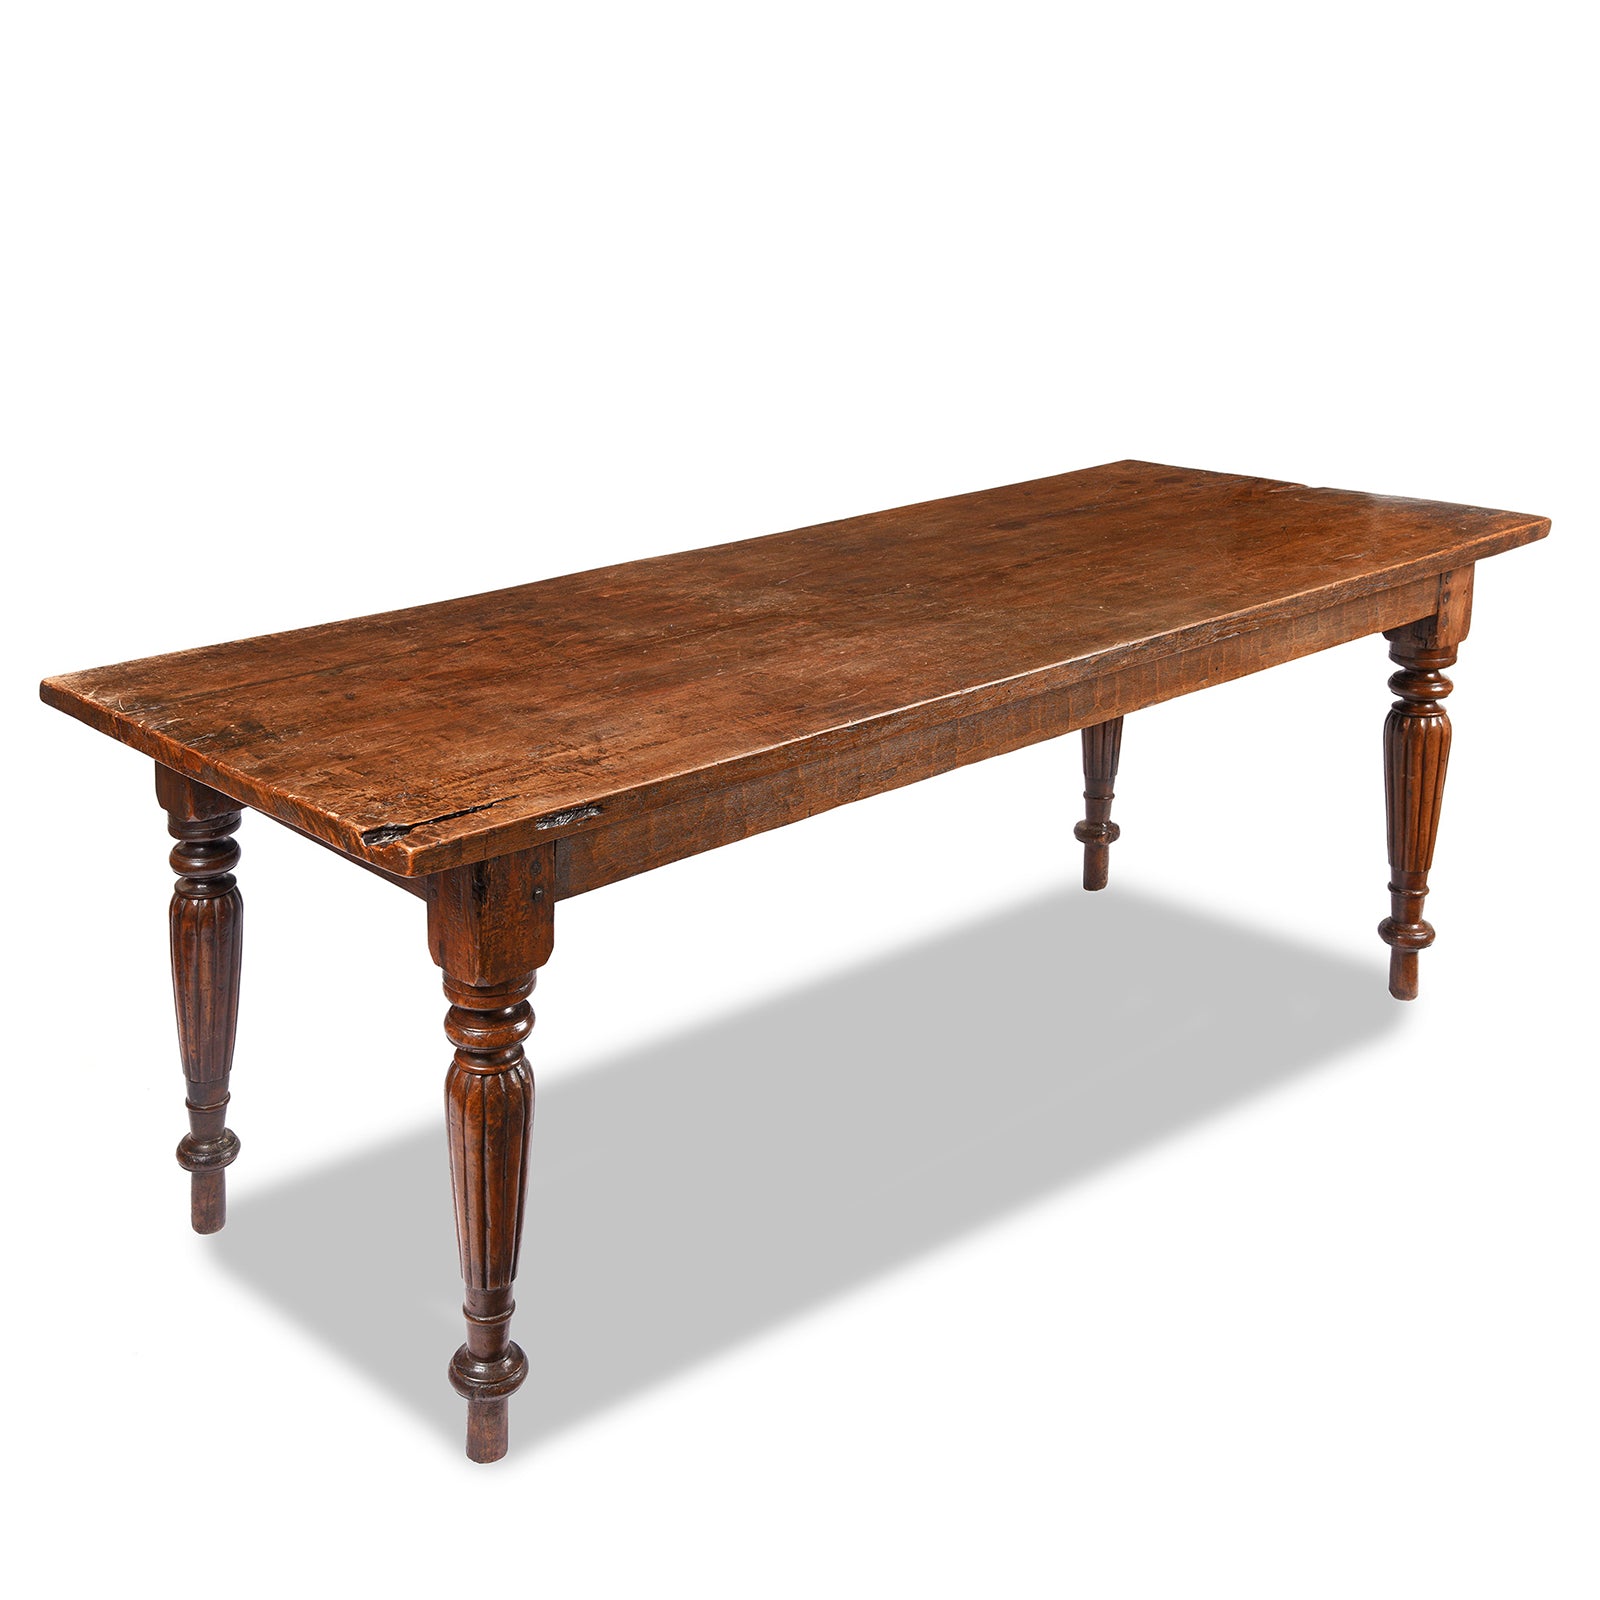 Angled View Of Old Teak 6 Seater Dining Table from Java - Ca 100 yrs old | Indigo Antiques